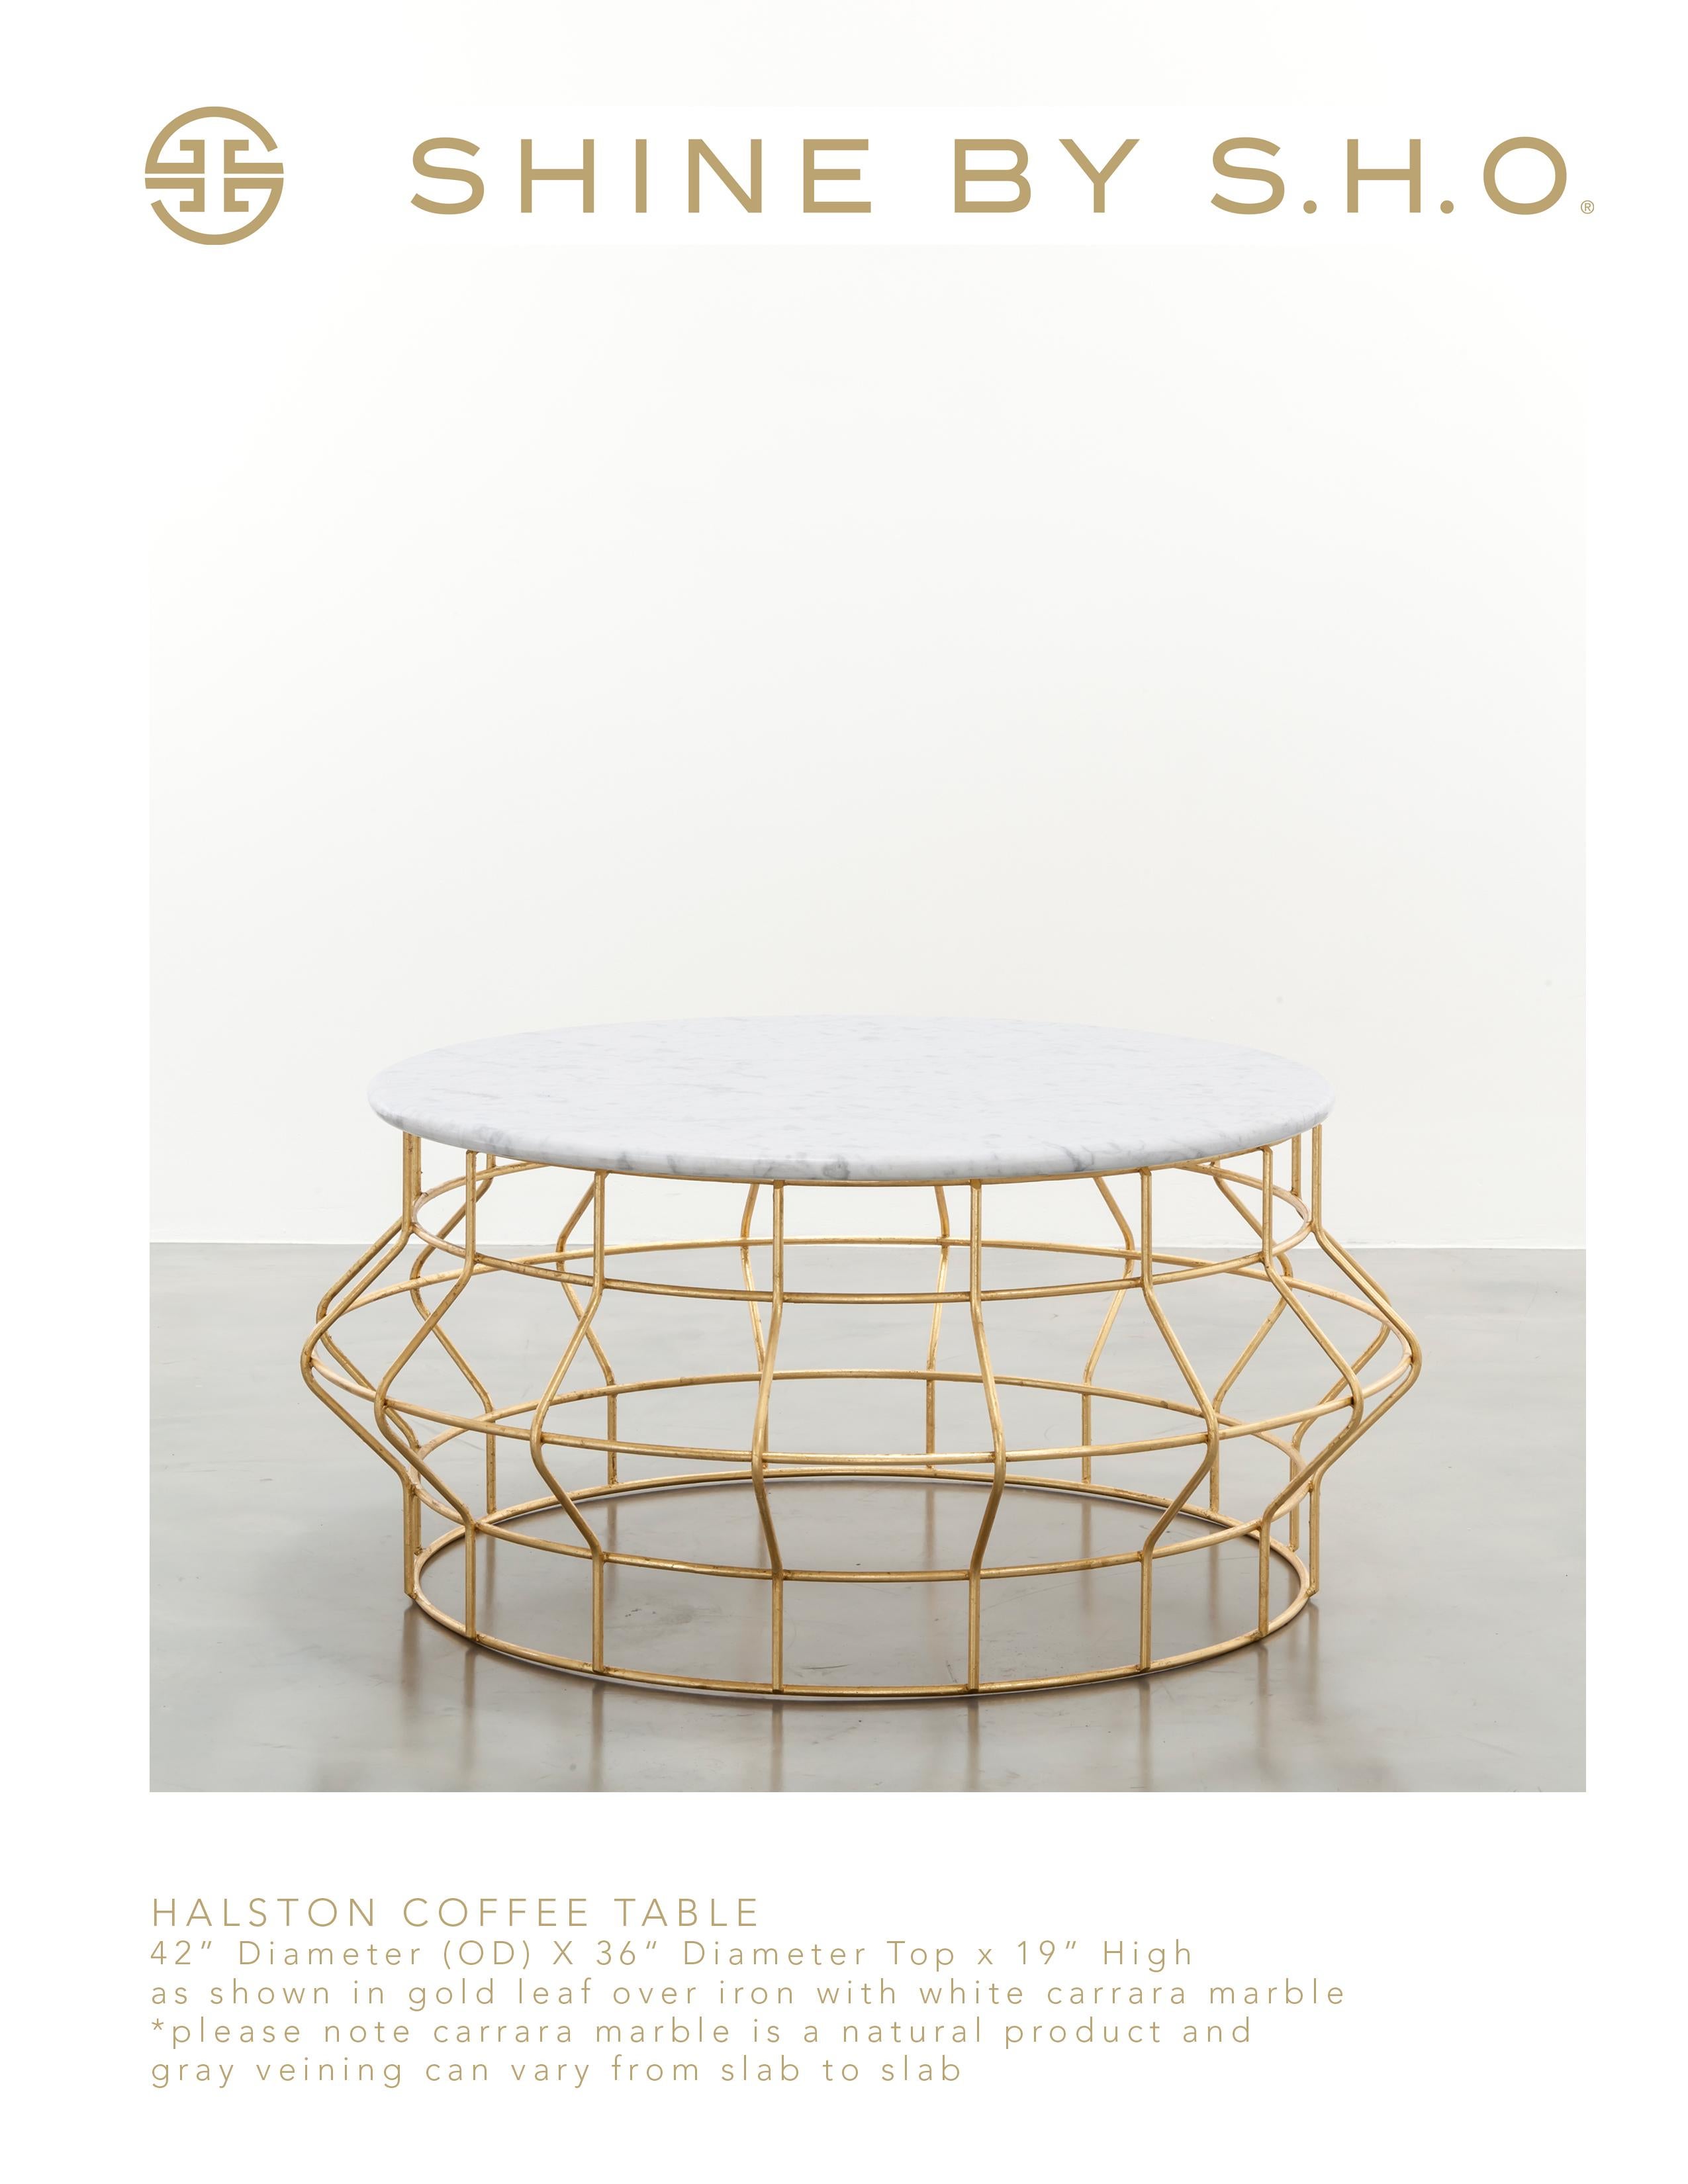 Modern HALSTON COFFEE TABLE - Silver Leaf and Carrara Marble Top